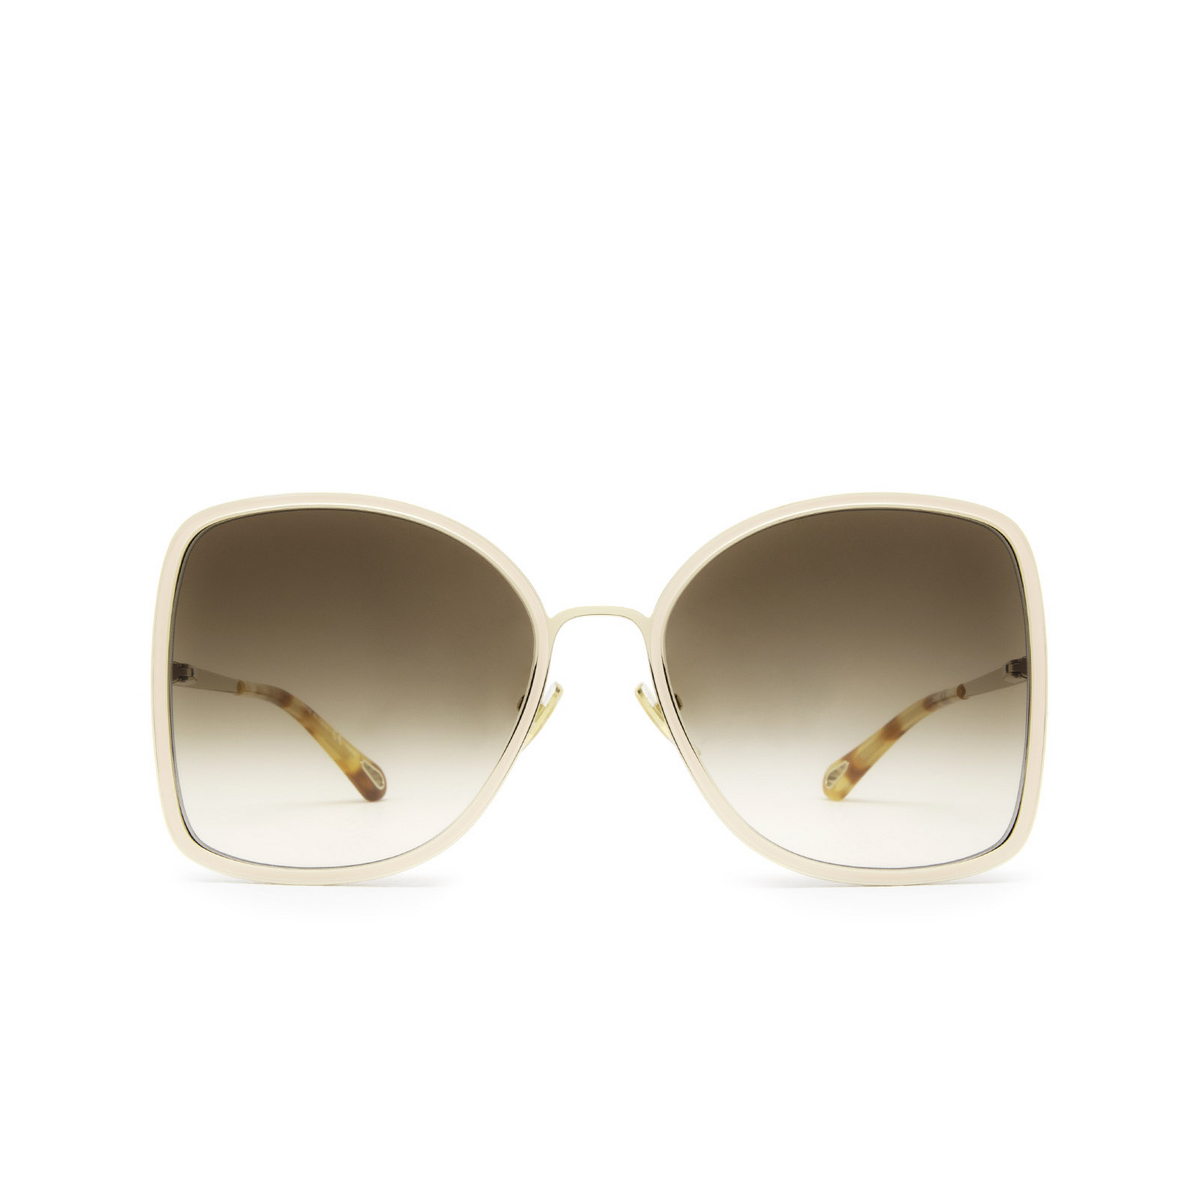 Chloé® Square Sunglasses: CH0101S color Gold & Nude 004 - front view.